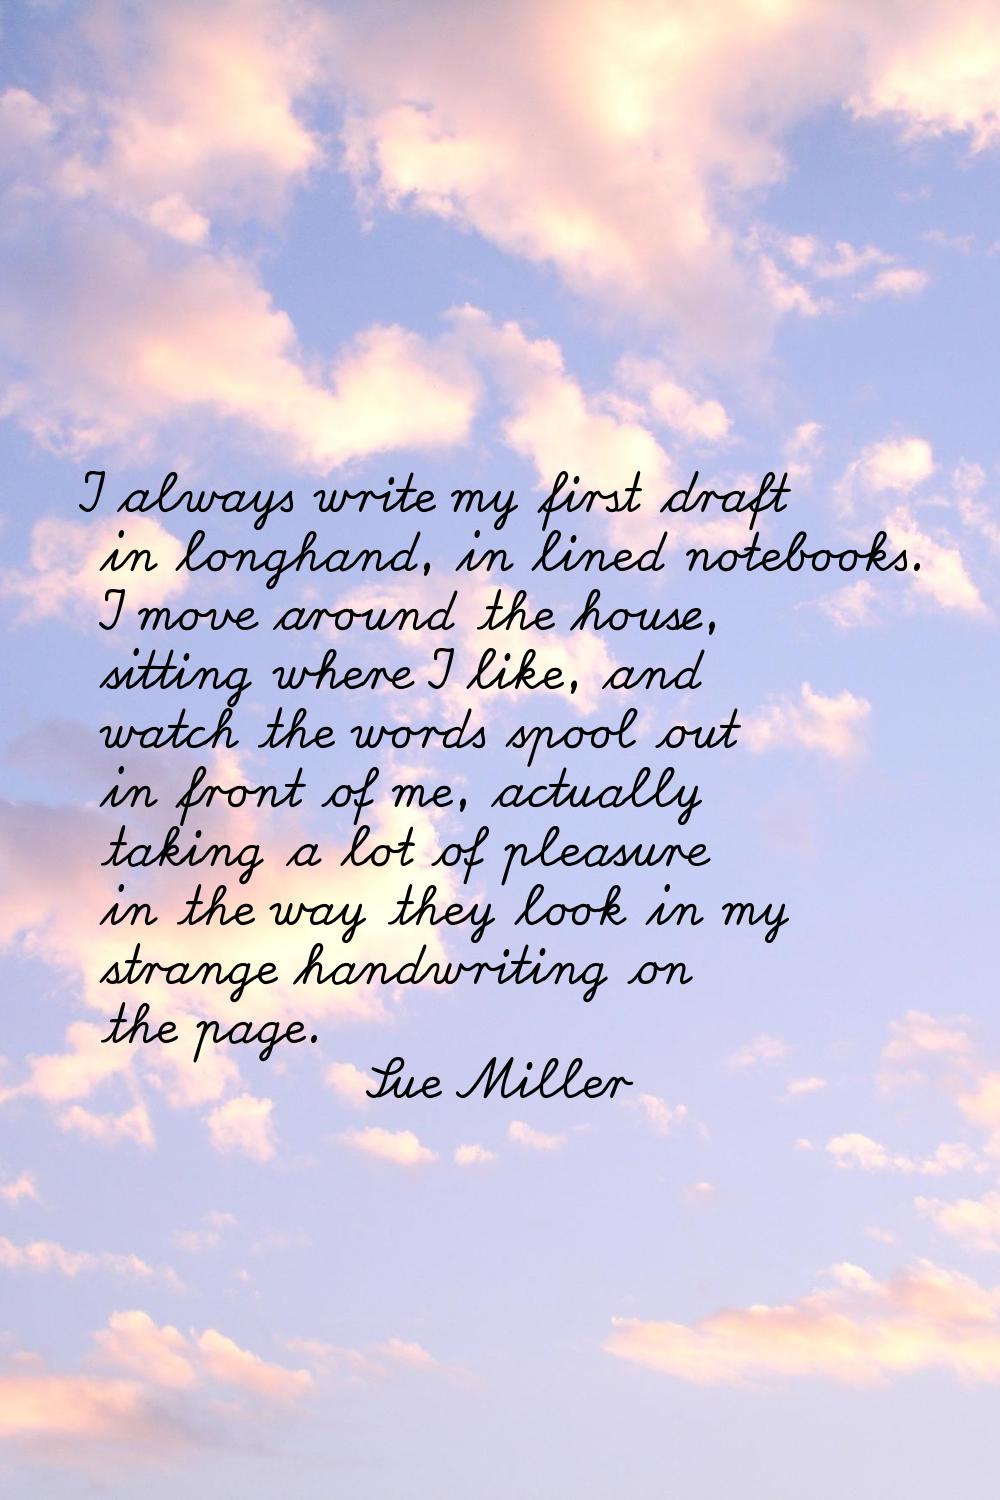 I always write my first draft in longhand, in lined notebooks. I move around the house, sitting whe